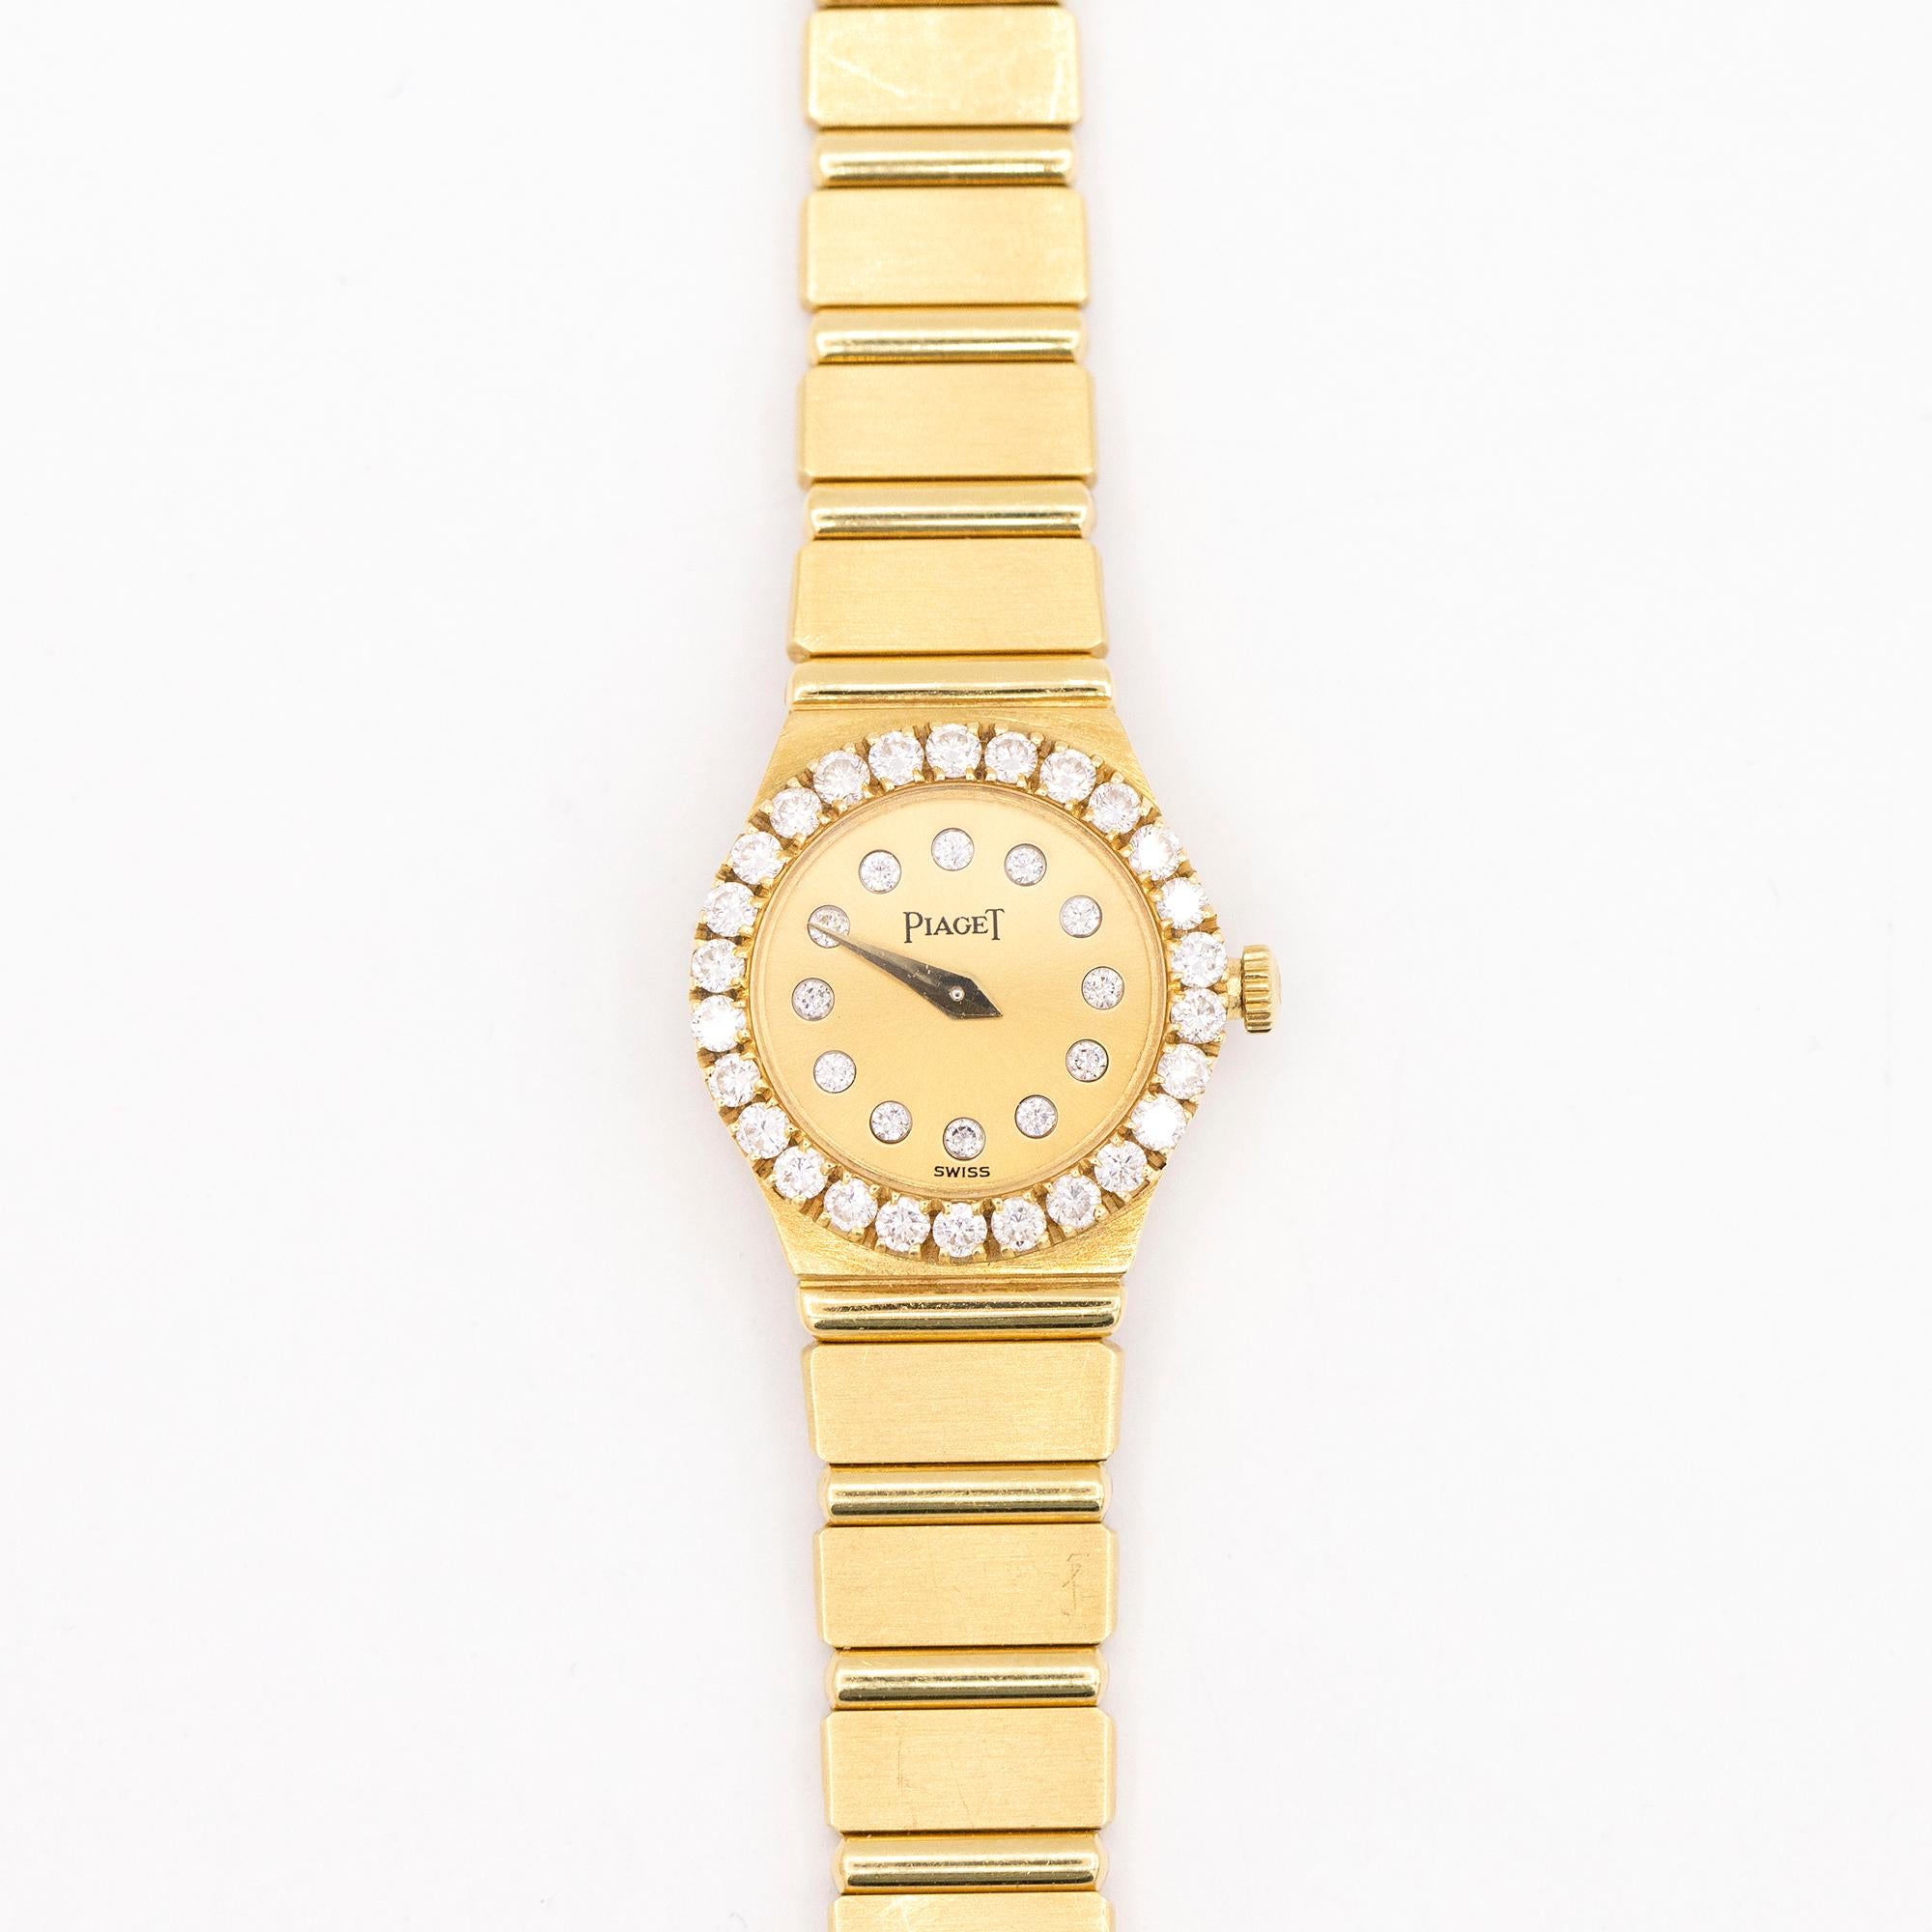 18 karat yellow gold Piaget Polo diamond bezel diamond dial quartz timepiece. The timepiece is a size 21mm with a solid 18 karat yellow gold bracelet. The model number is 846C701. There are 26 round brilliant cut diamonds on the bezel weighing .78